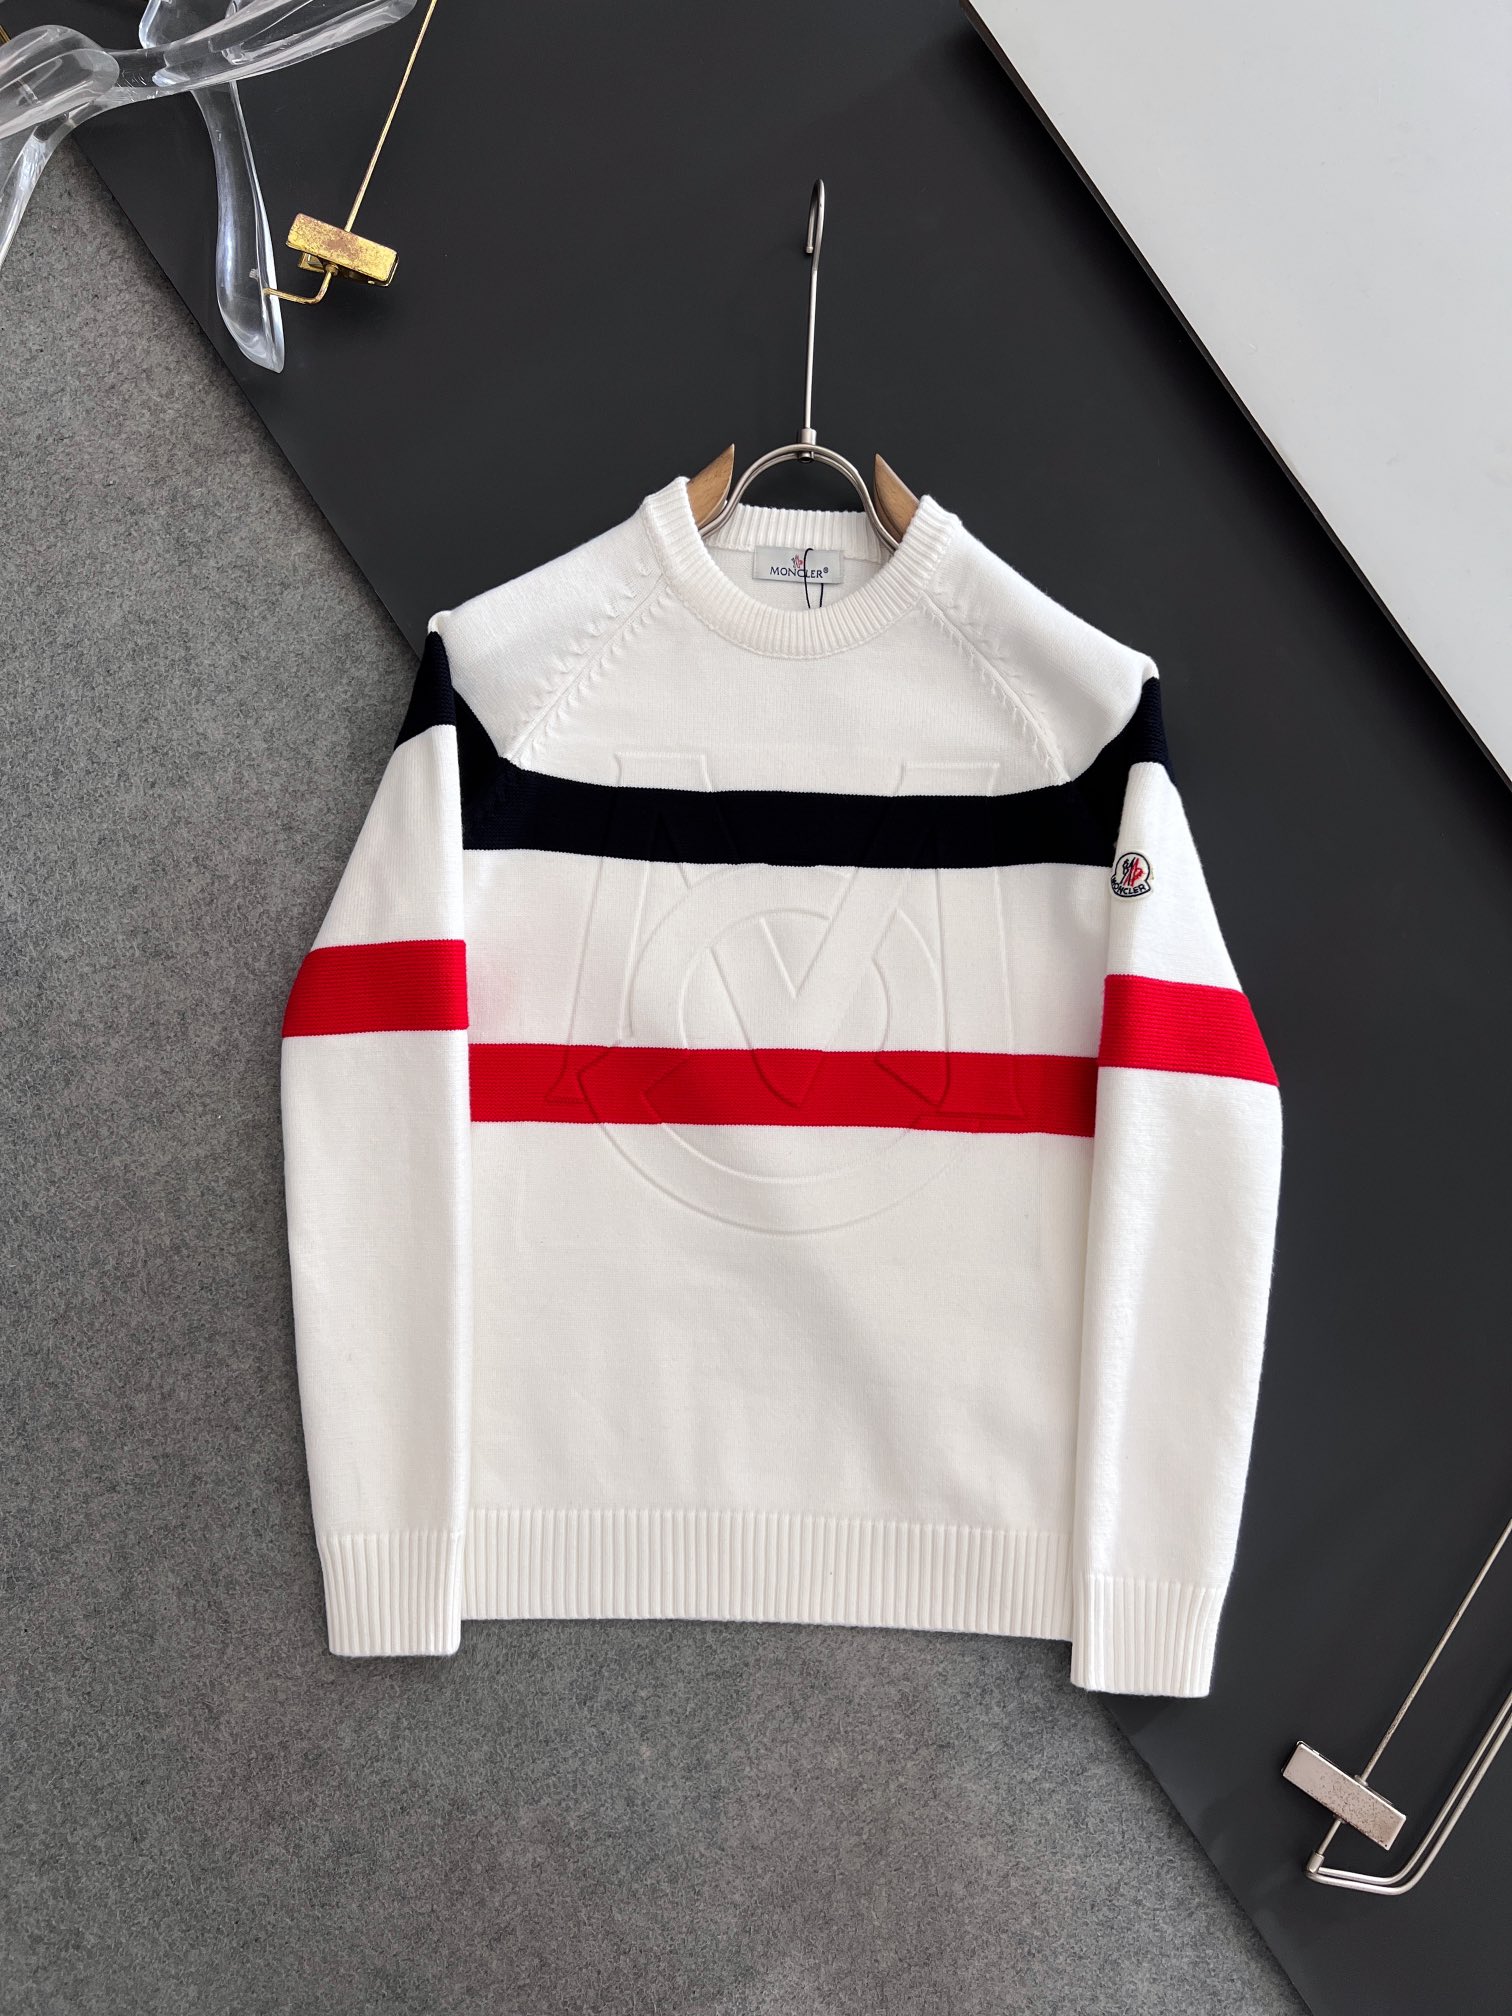 Moncler Clothing Sweatshirts High Quality Online
 Black Knitting Wool Fall/Winter Collection Fashion